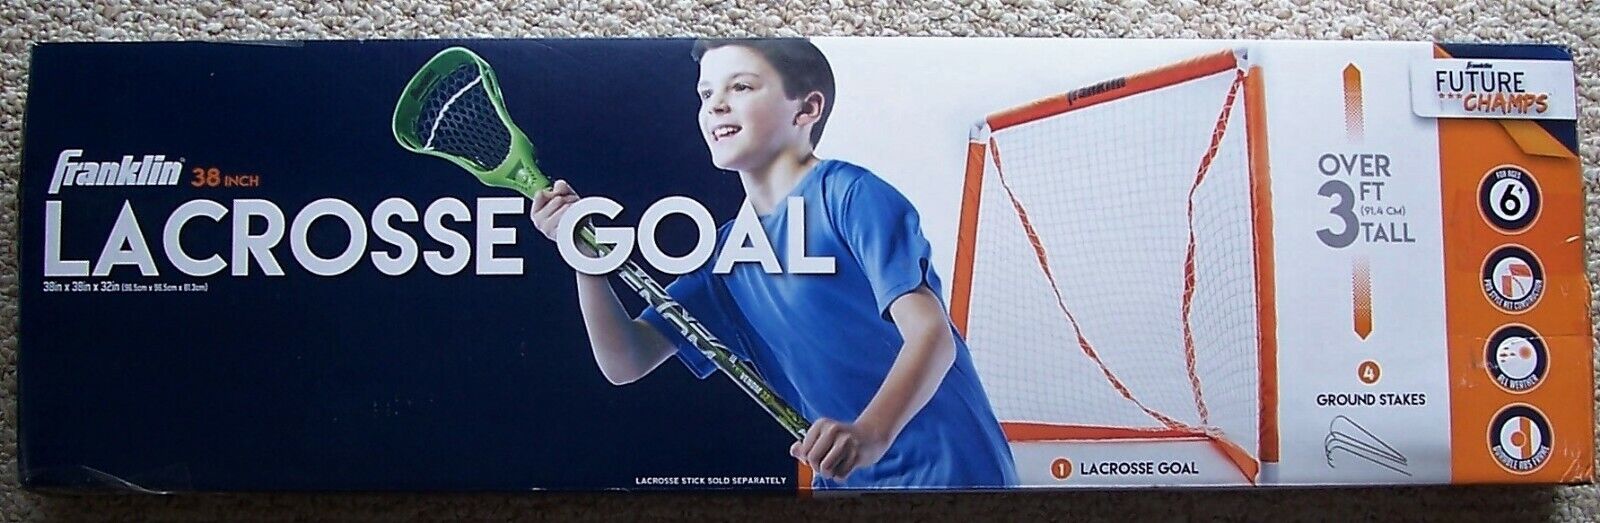 New Franklin Sports Youth Lacrosse Goal 38 Inch Number 60014